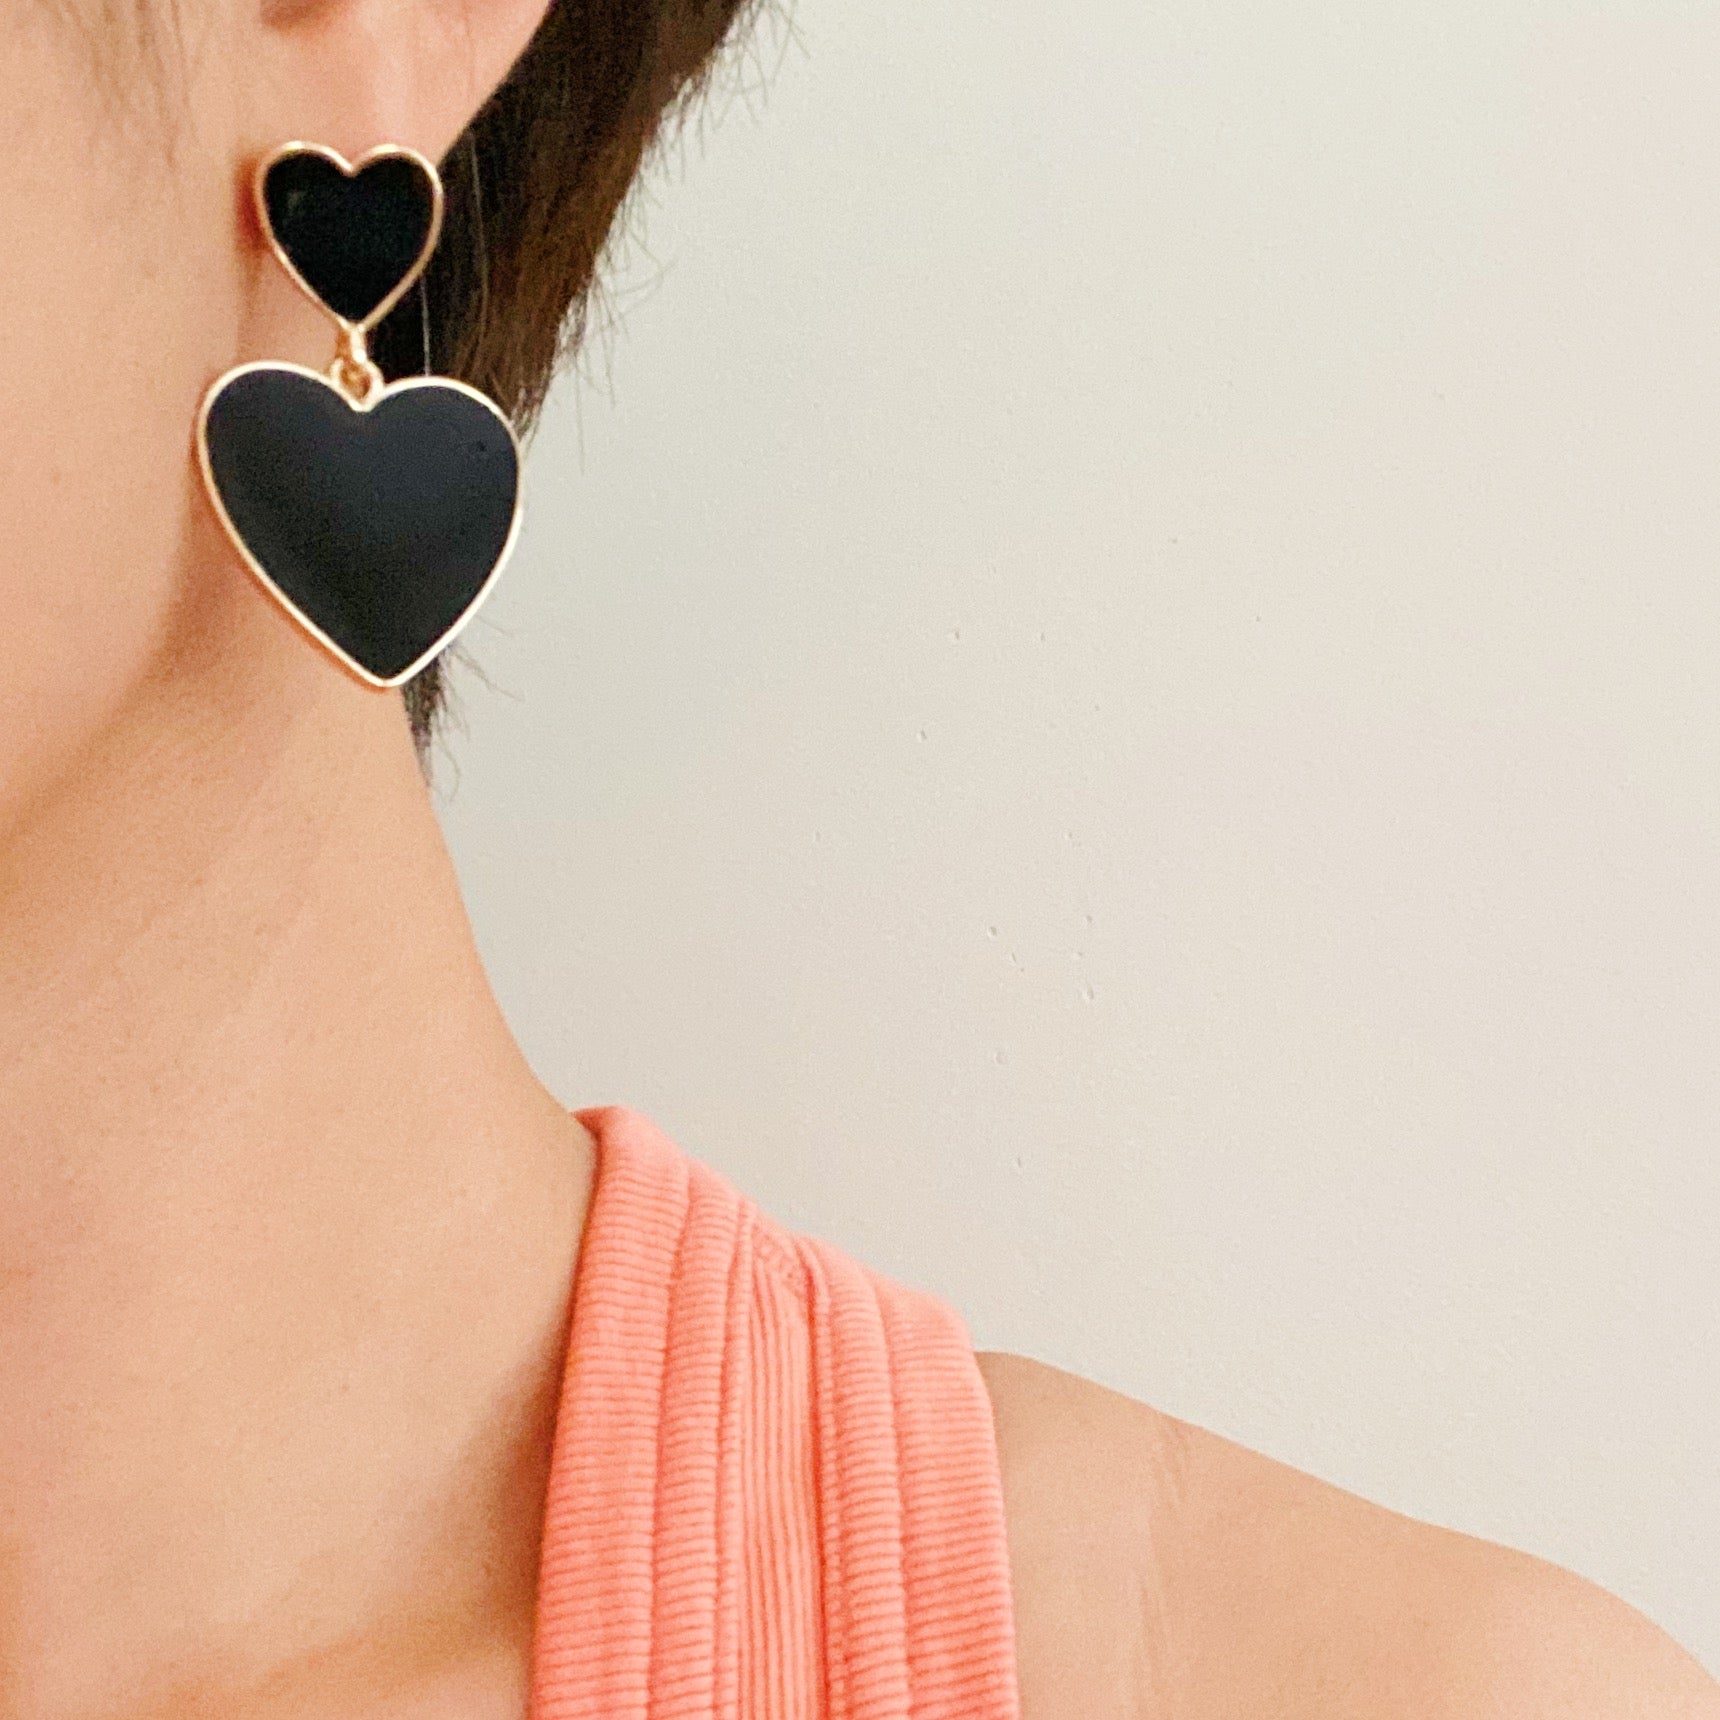 Heart For Game Day Earrings Ellisonyoung.com